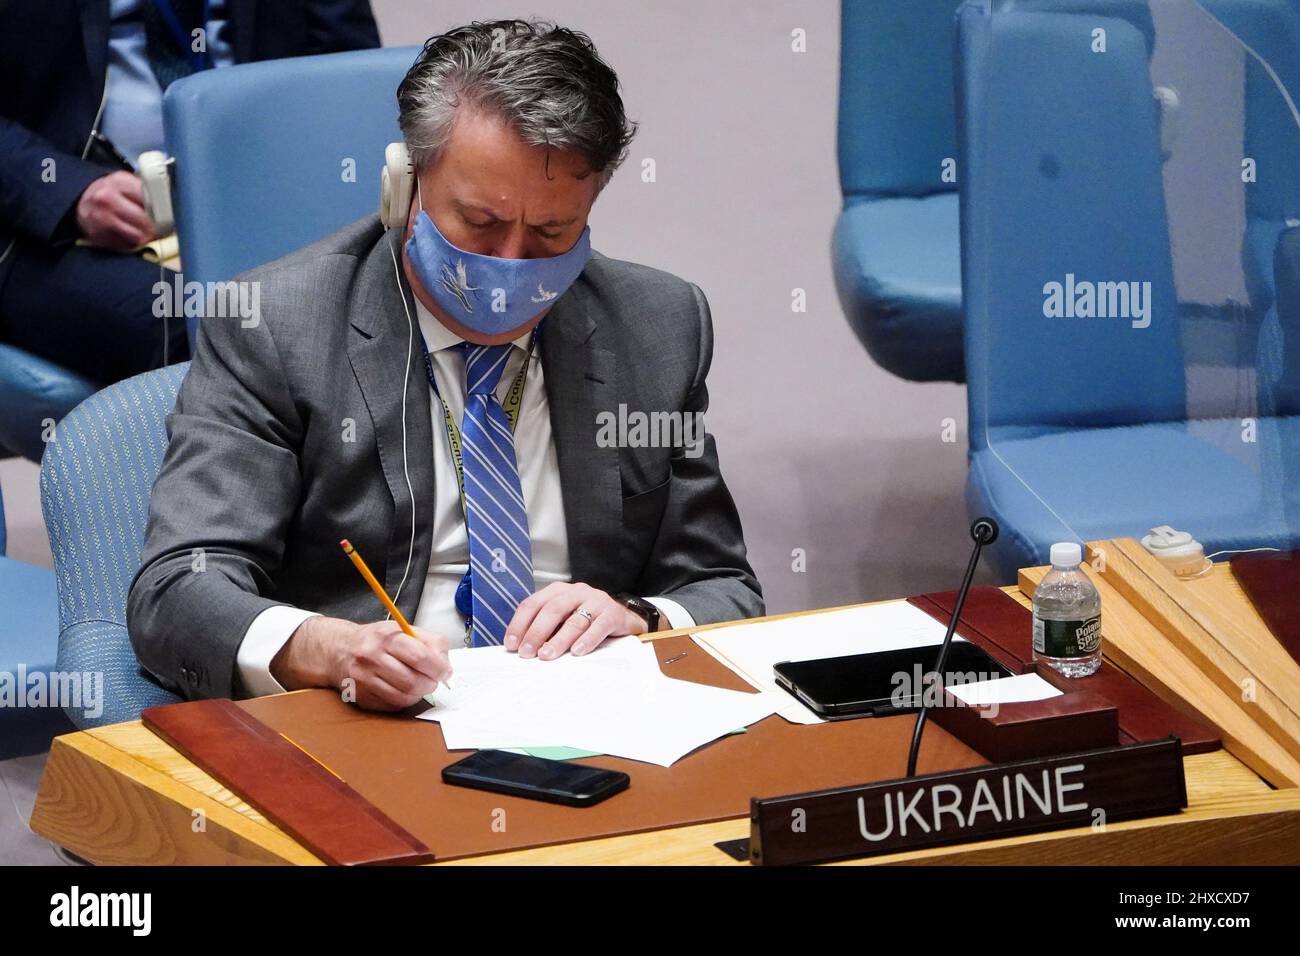 Ukrainian Ambassador to the U.N. Sergiy Kyslytsya attends the United Nations Security Council meeting on Threats to International Peace and Security, following Russia's invasion of Ukraine, in New York City, U.S. March 11, 2022. REUTERS/Carlo Allegri Stock Photo